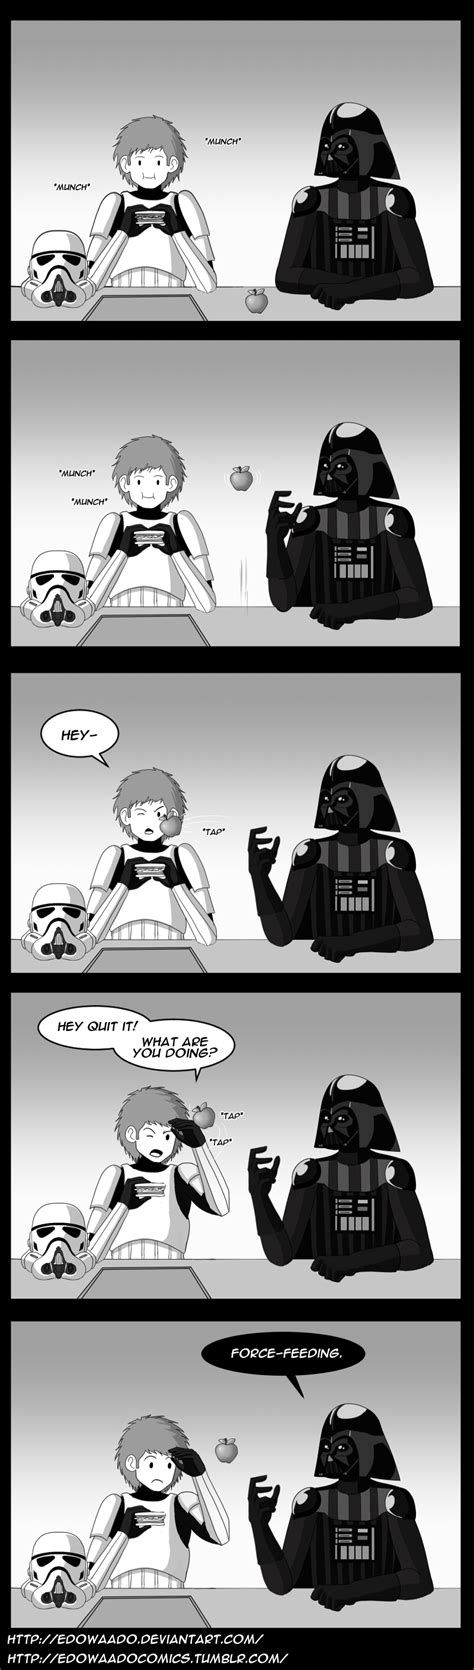 star wars pictures and jokes fandoms funny pictures